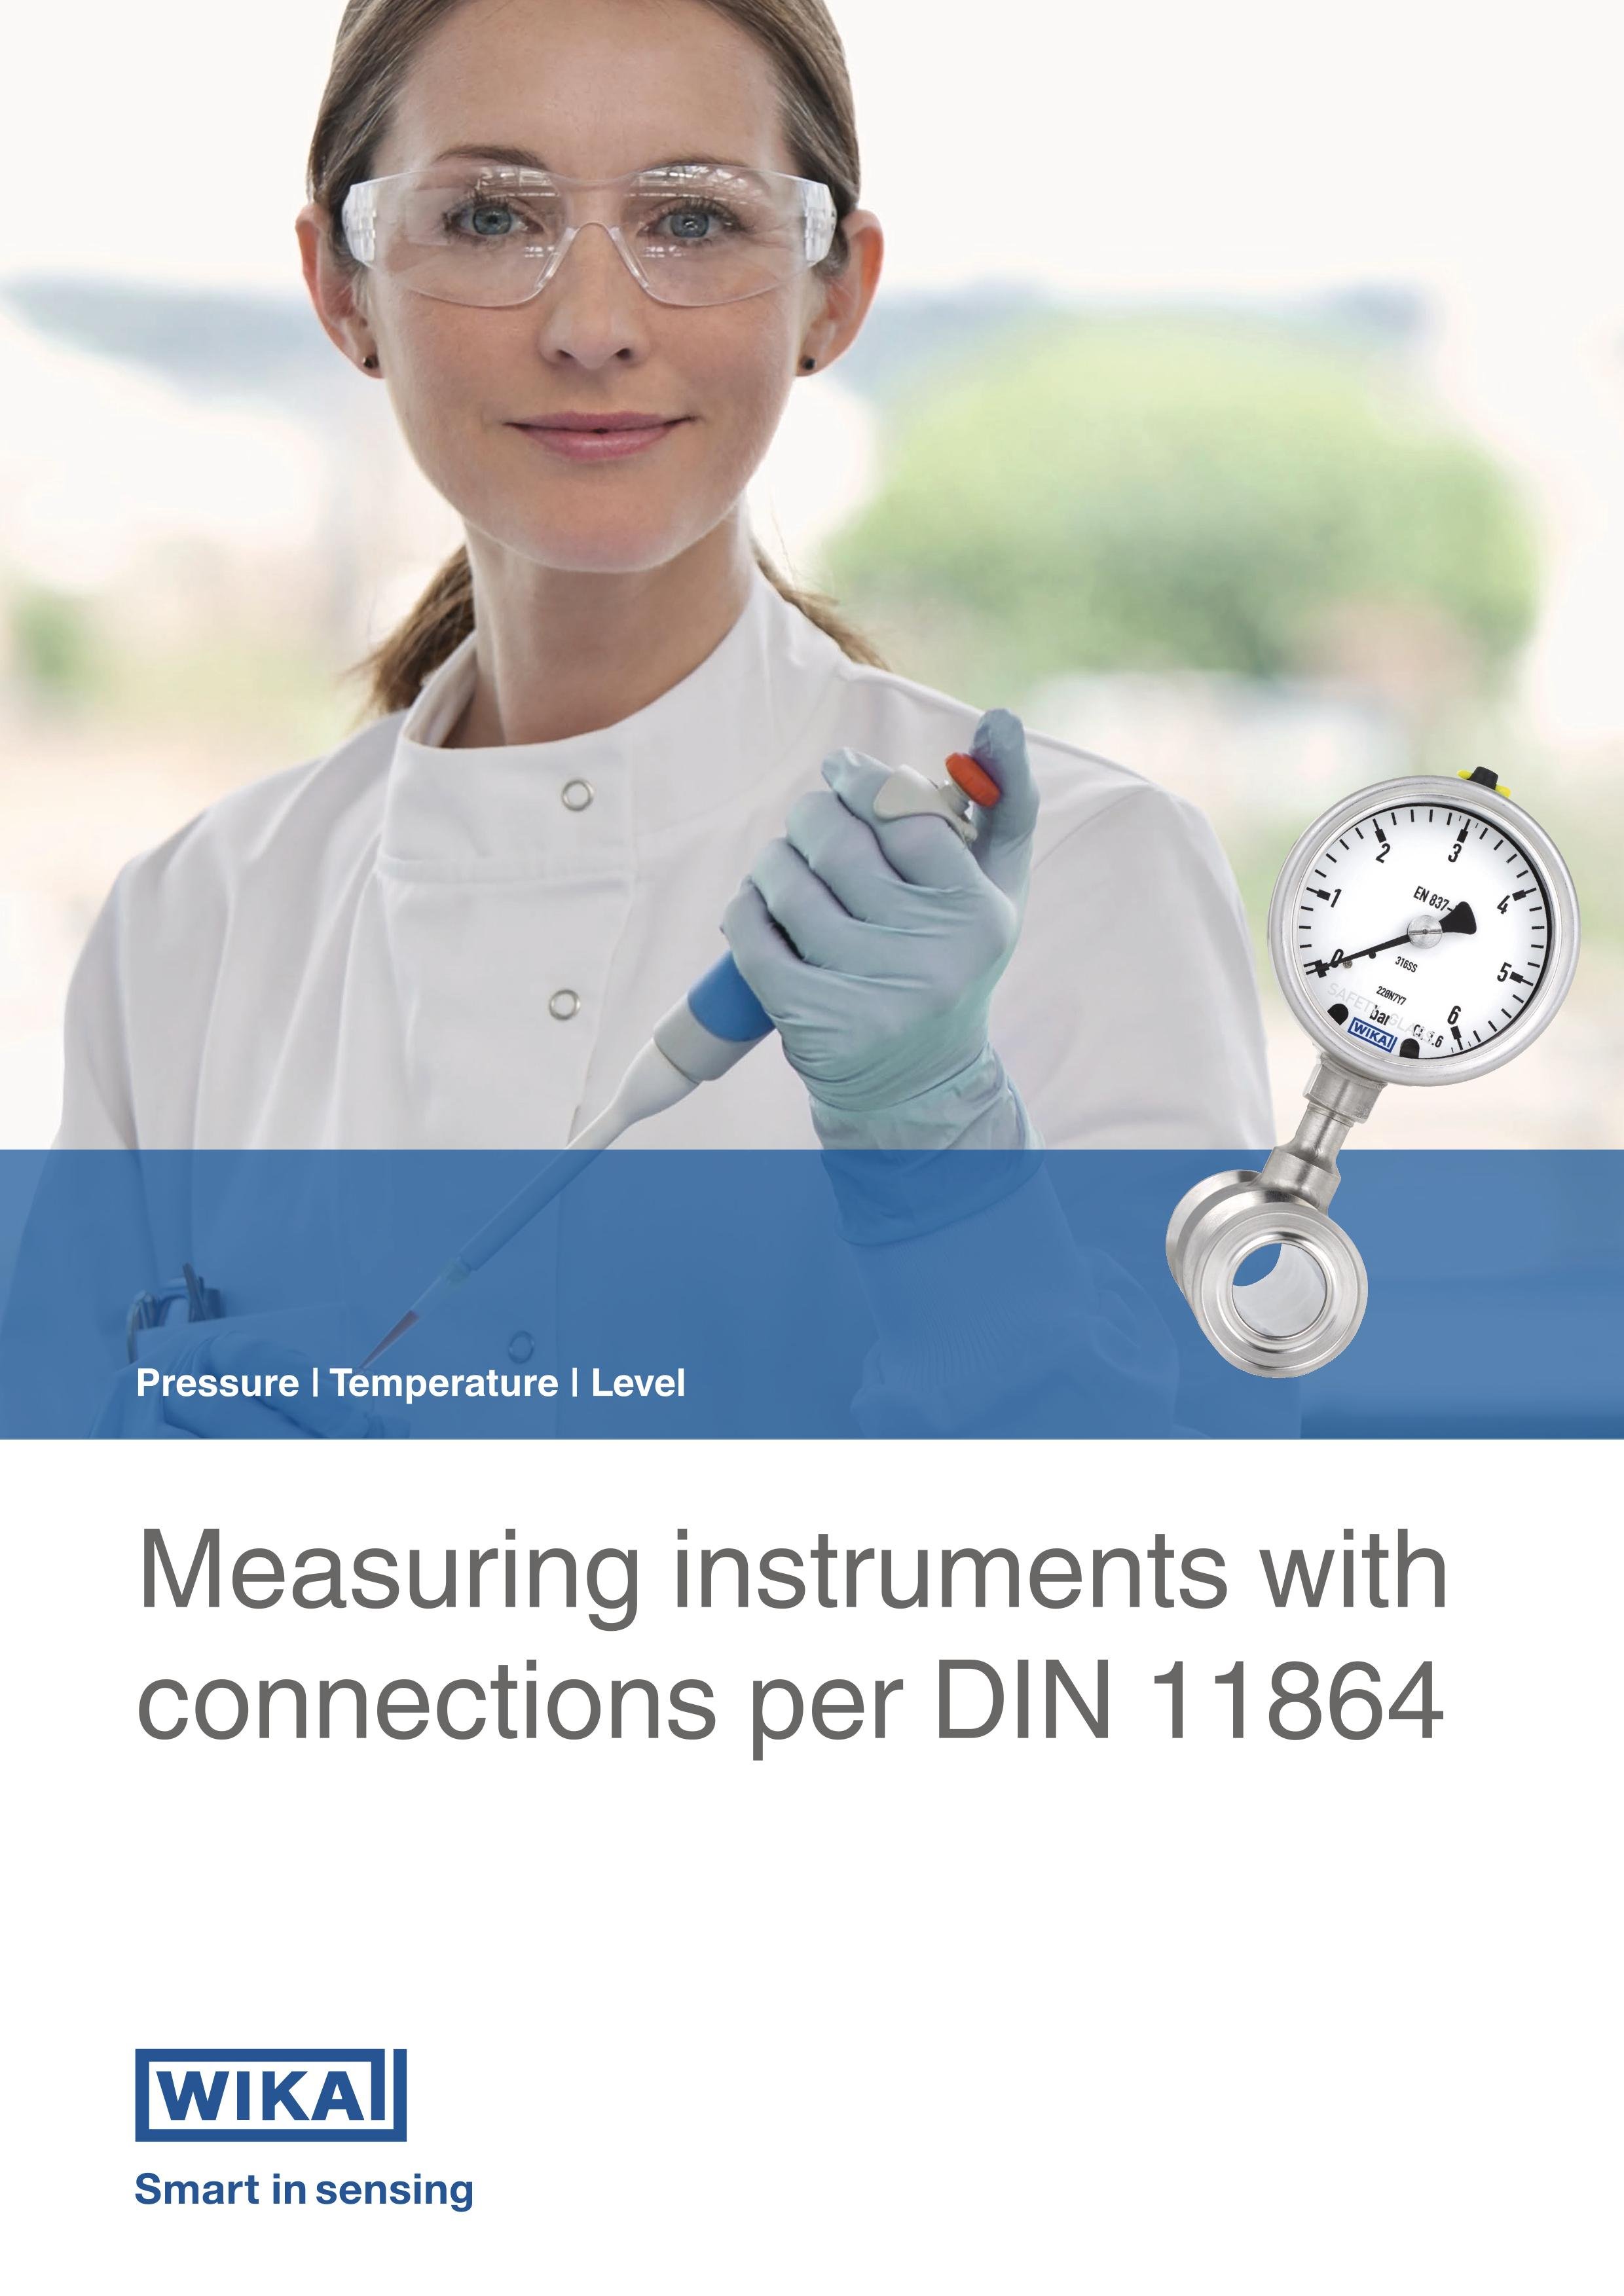 Measuring instruments with connections per DIN 11864